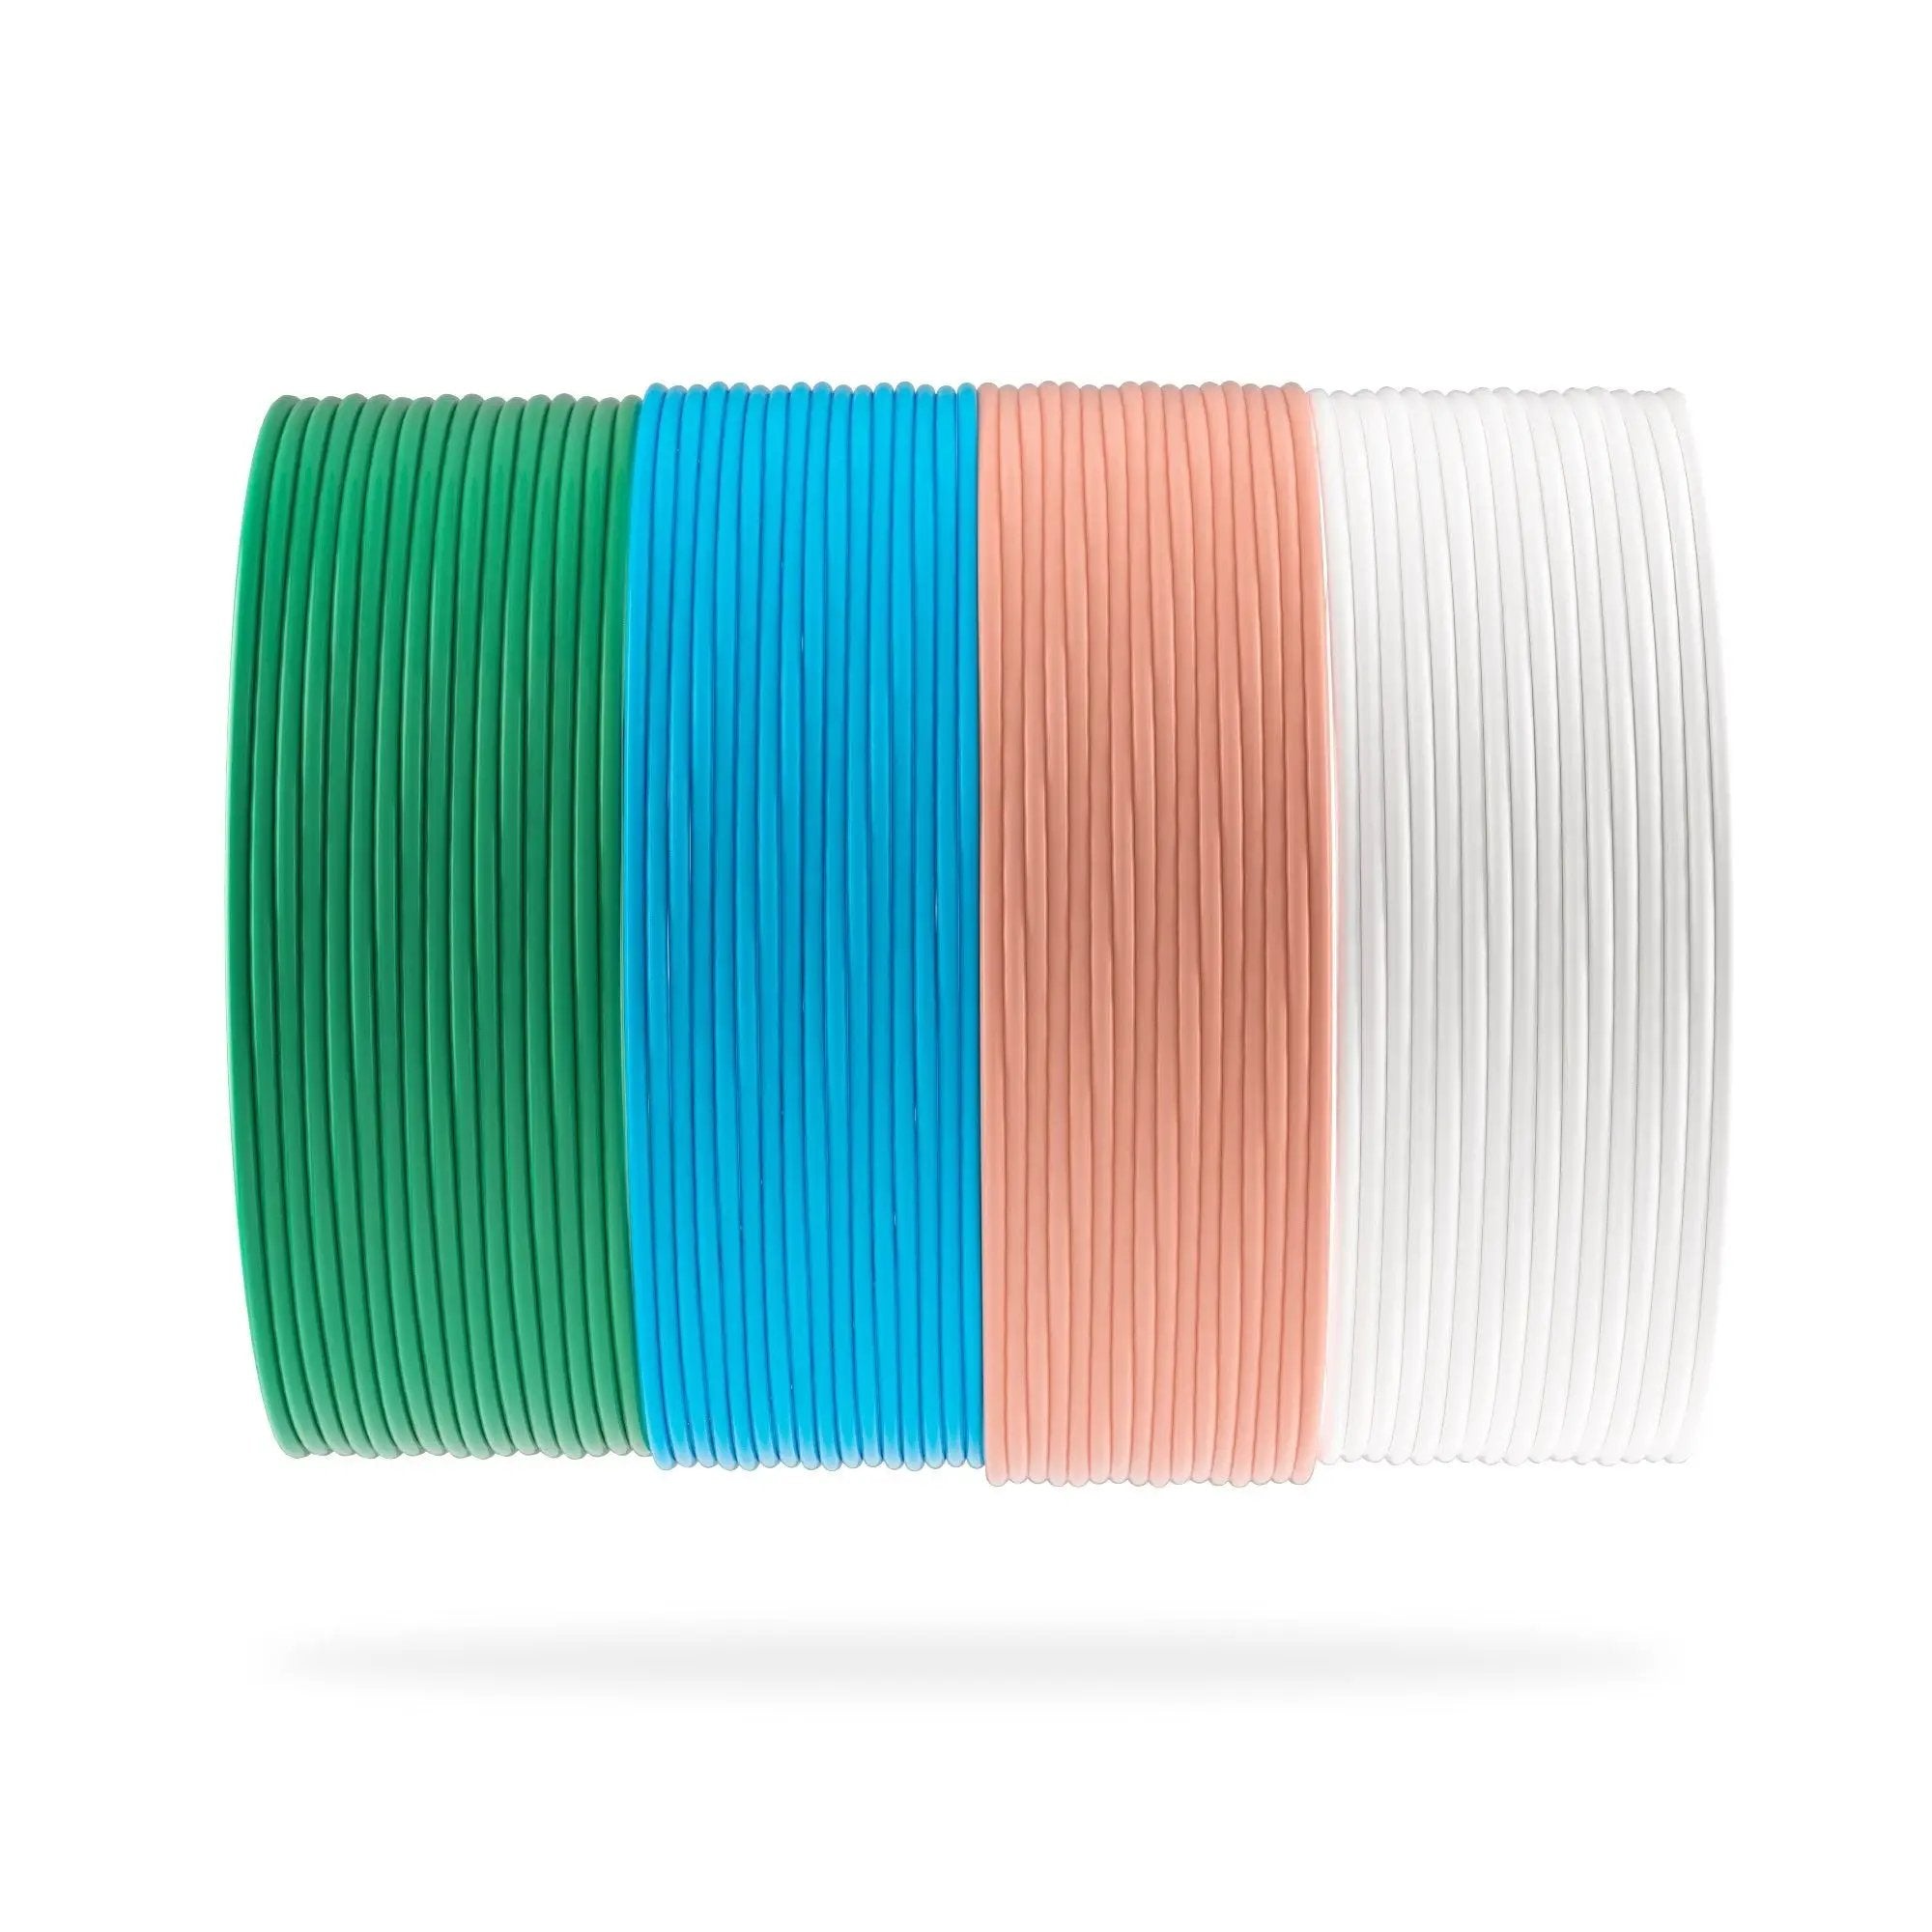 Flexible TPU Filament 1.75mm 3D Printing Materials Multicolor Blue Red  Green Transparent Turquoise for 3D Printer Tpu Filamento